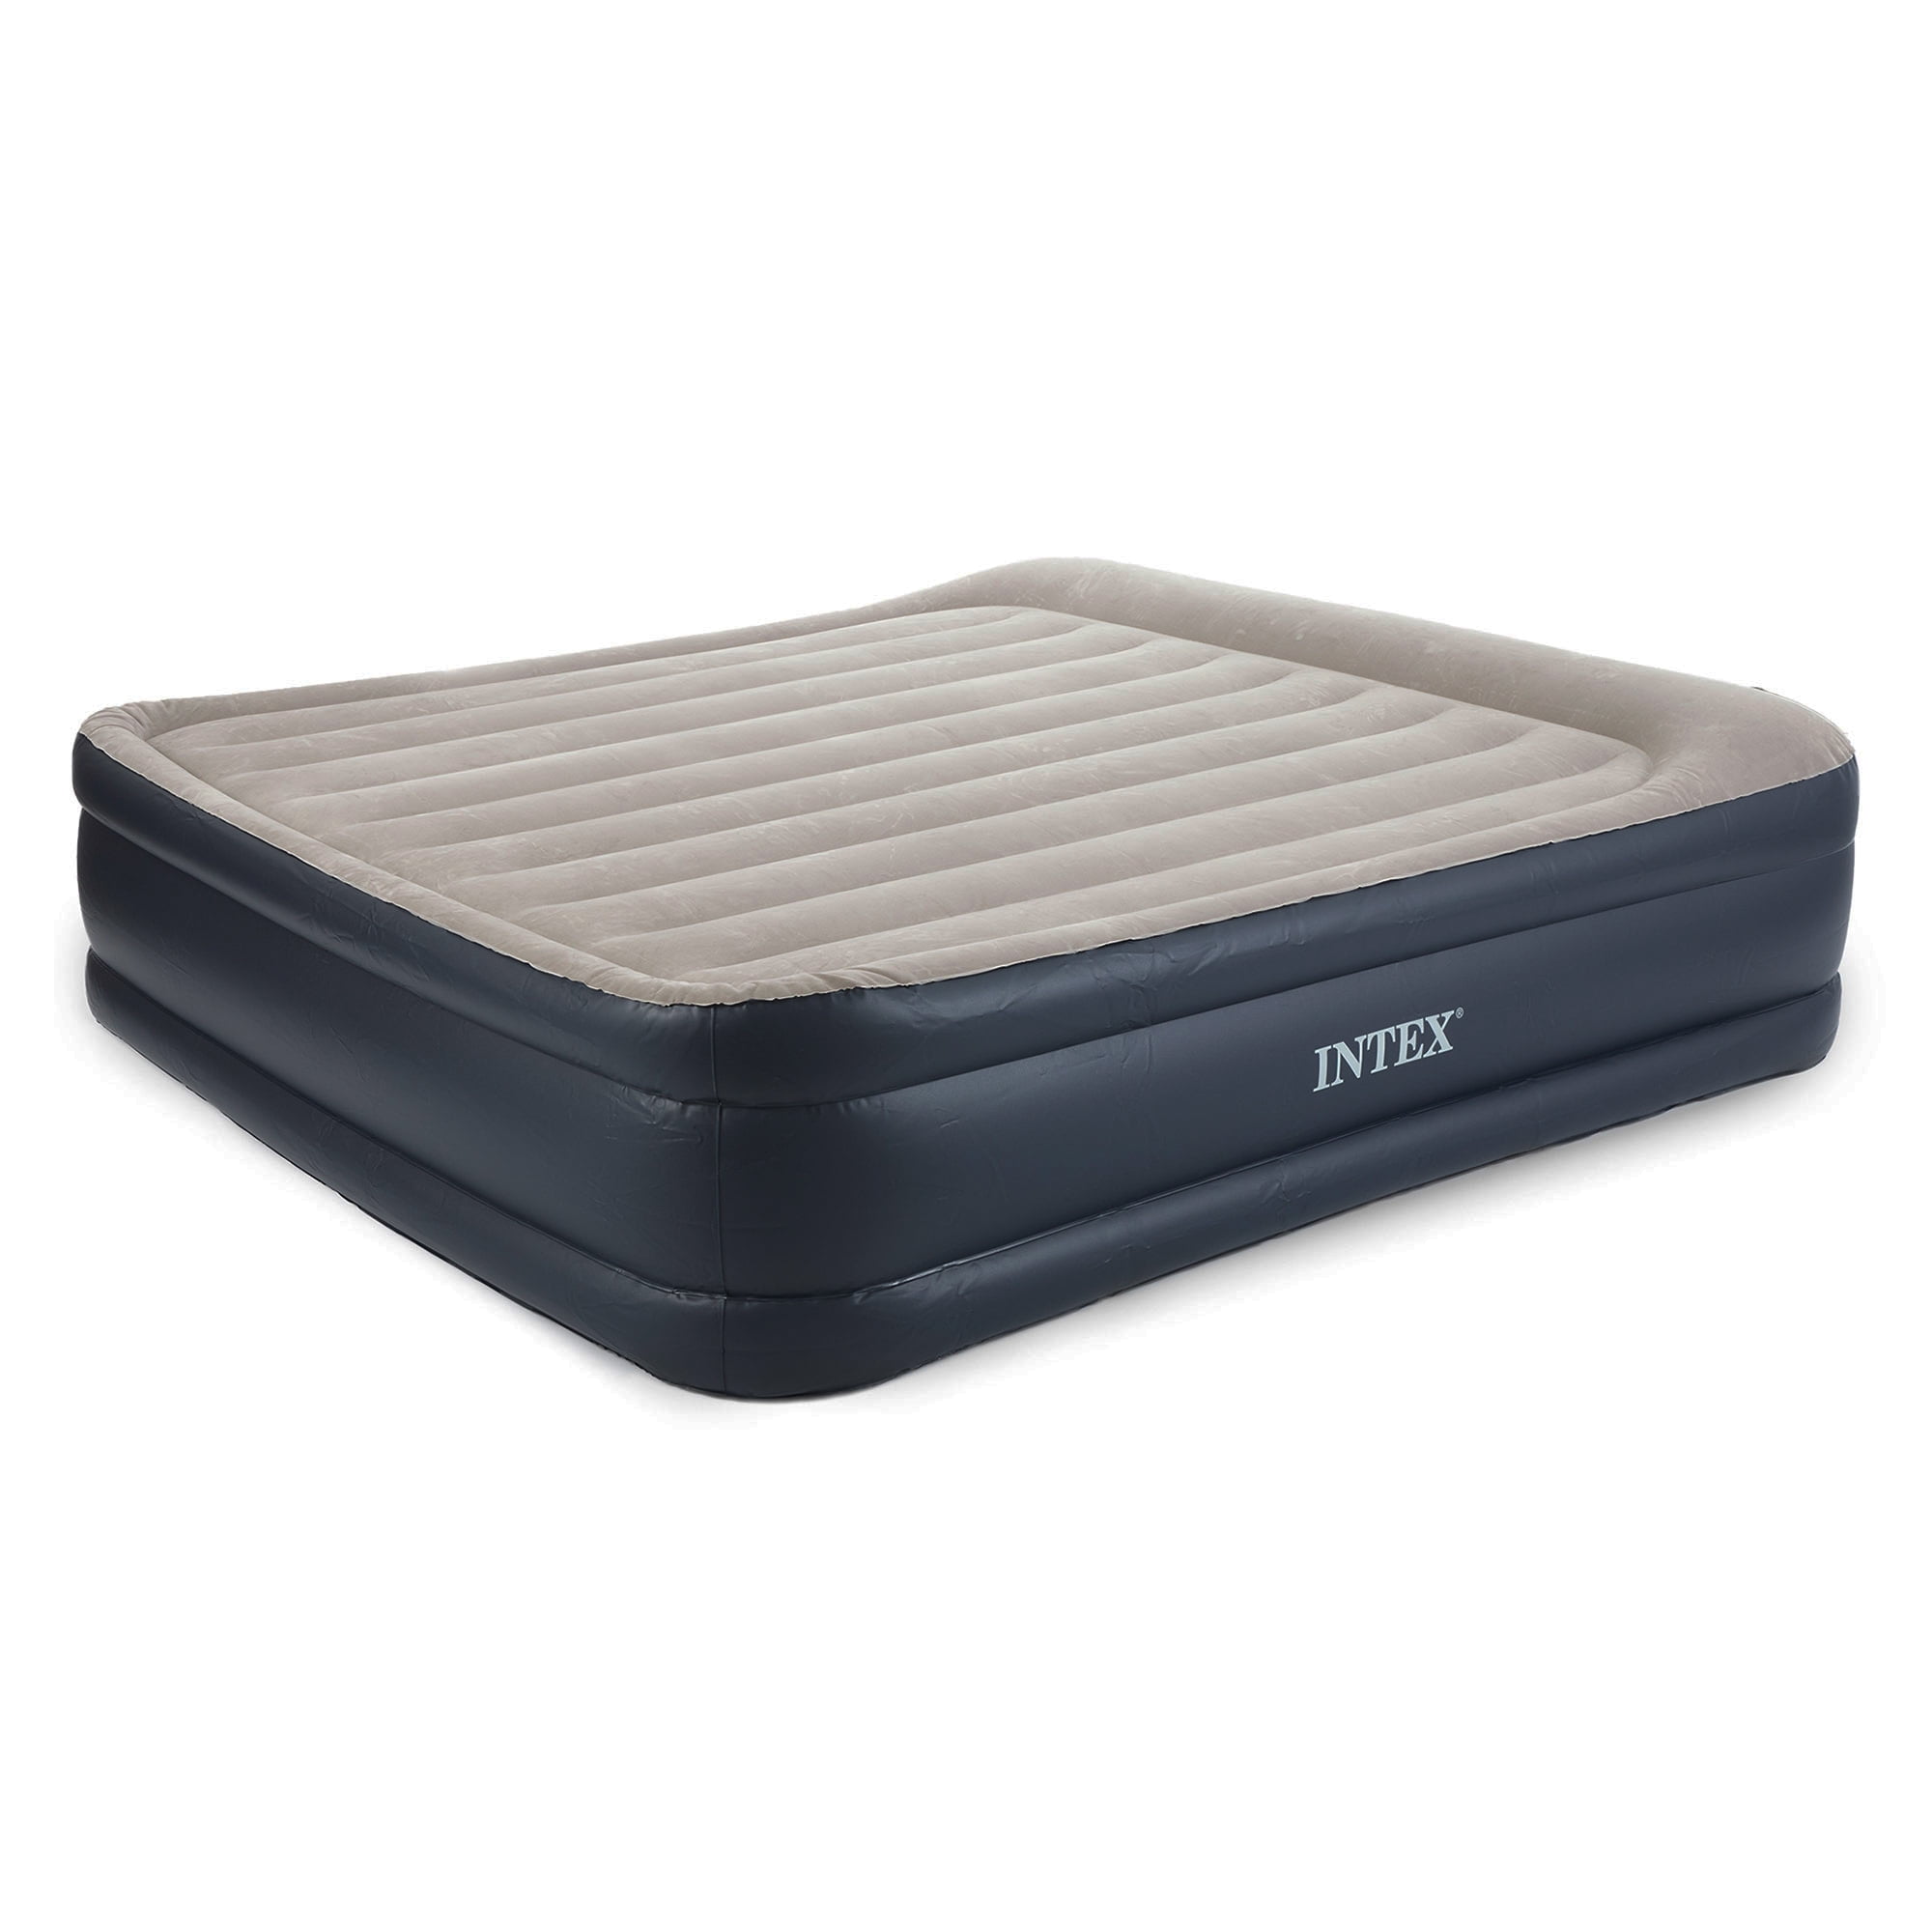 King Intex Deluxe Pillow Rest Inflatable Air Mattress with Pump Open Box 